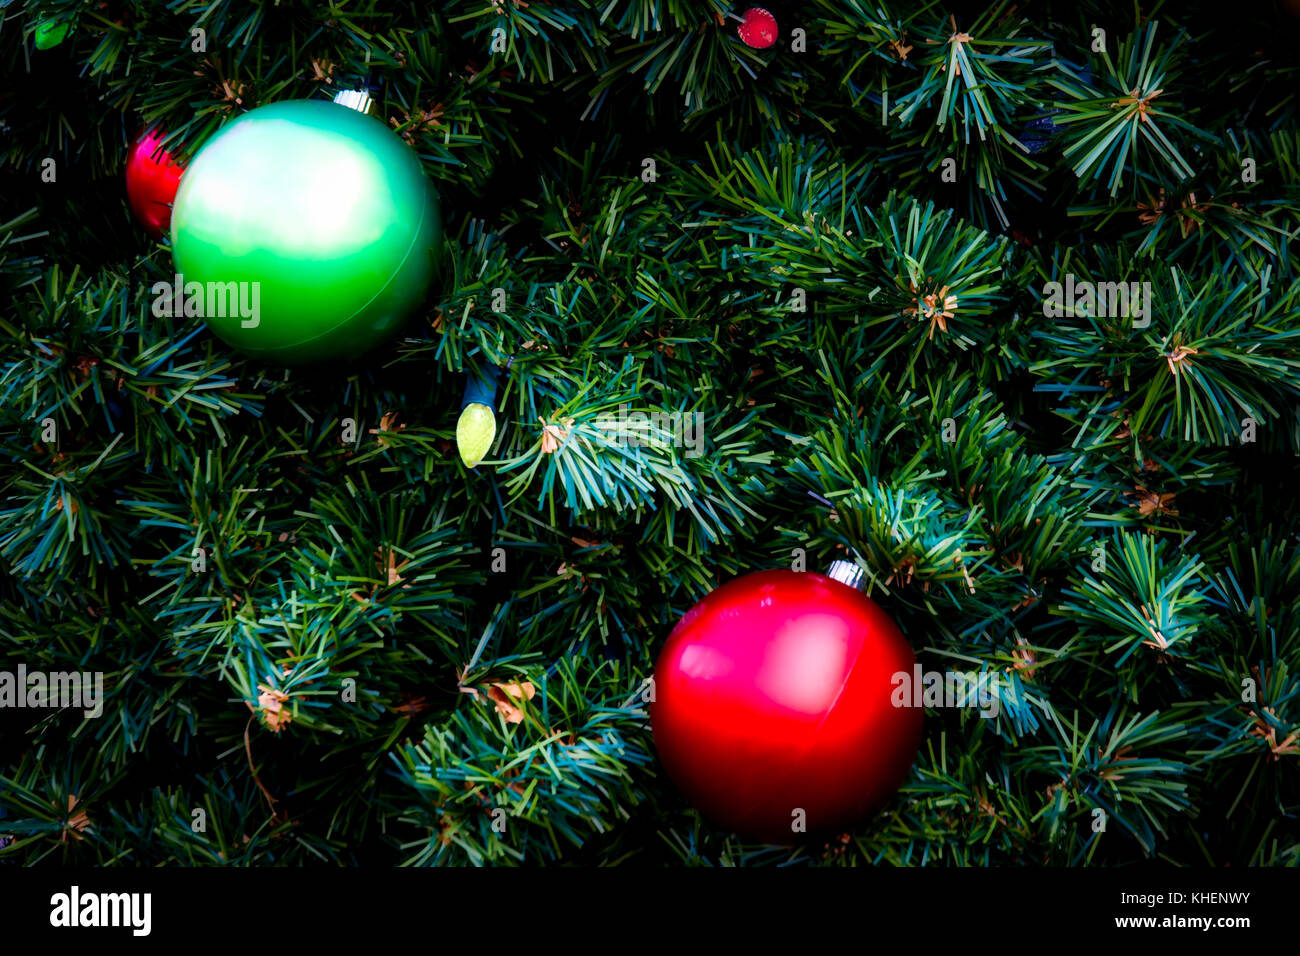 A traditional Christmas tree with colorful ornaments for the holidays. Stock Photo